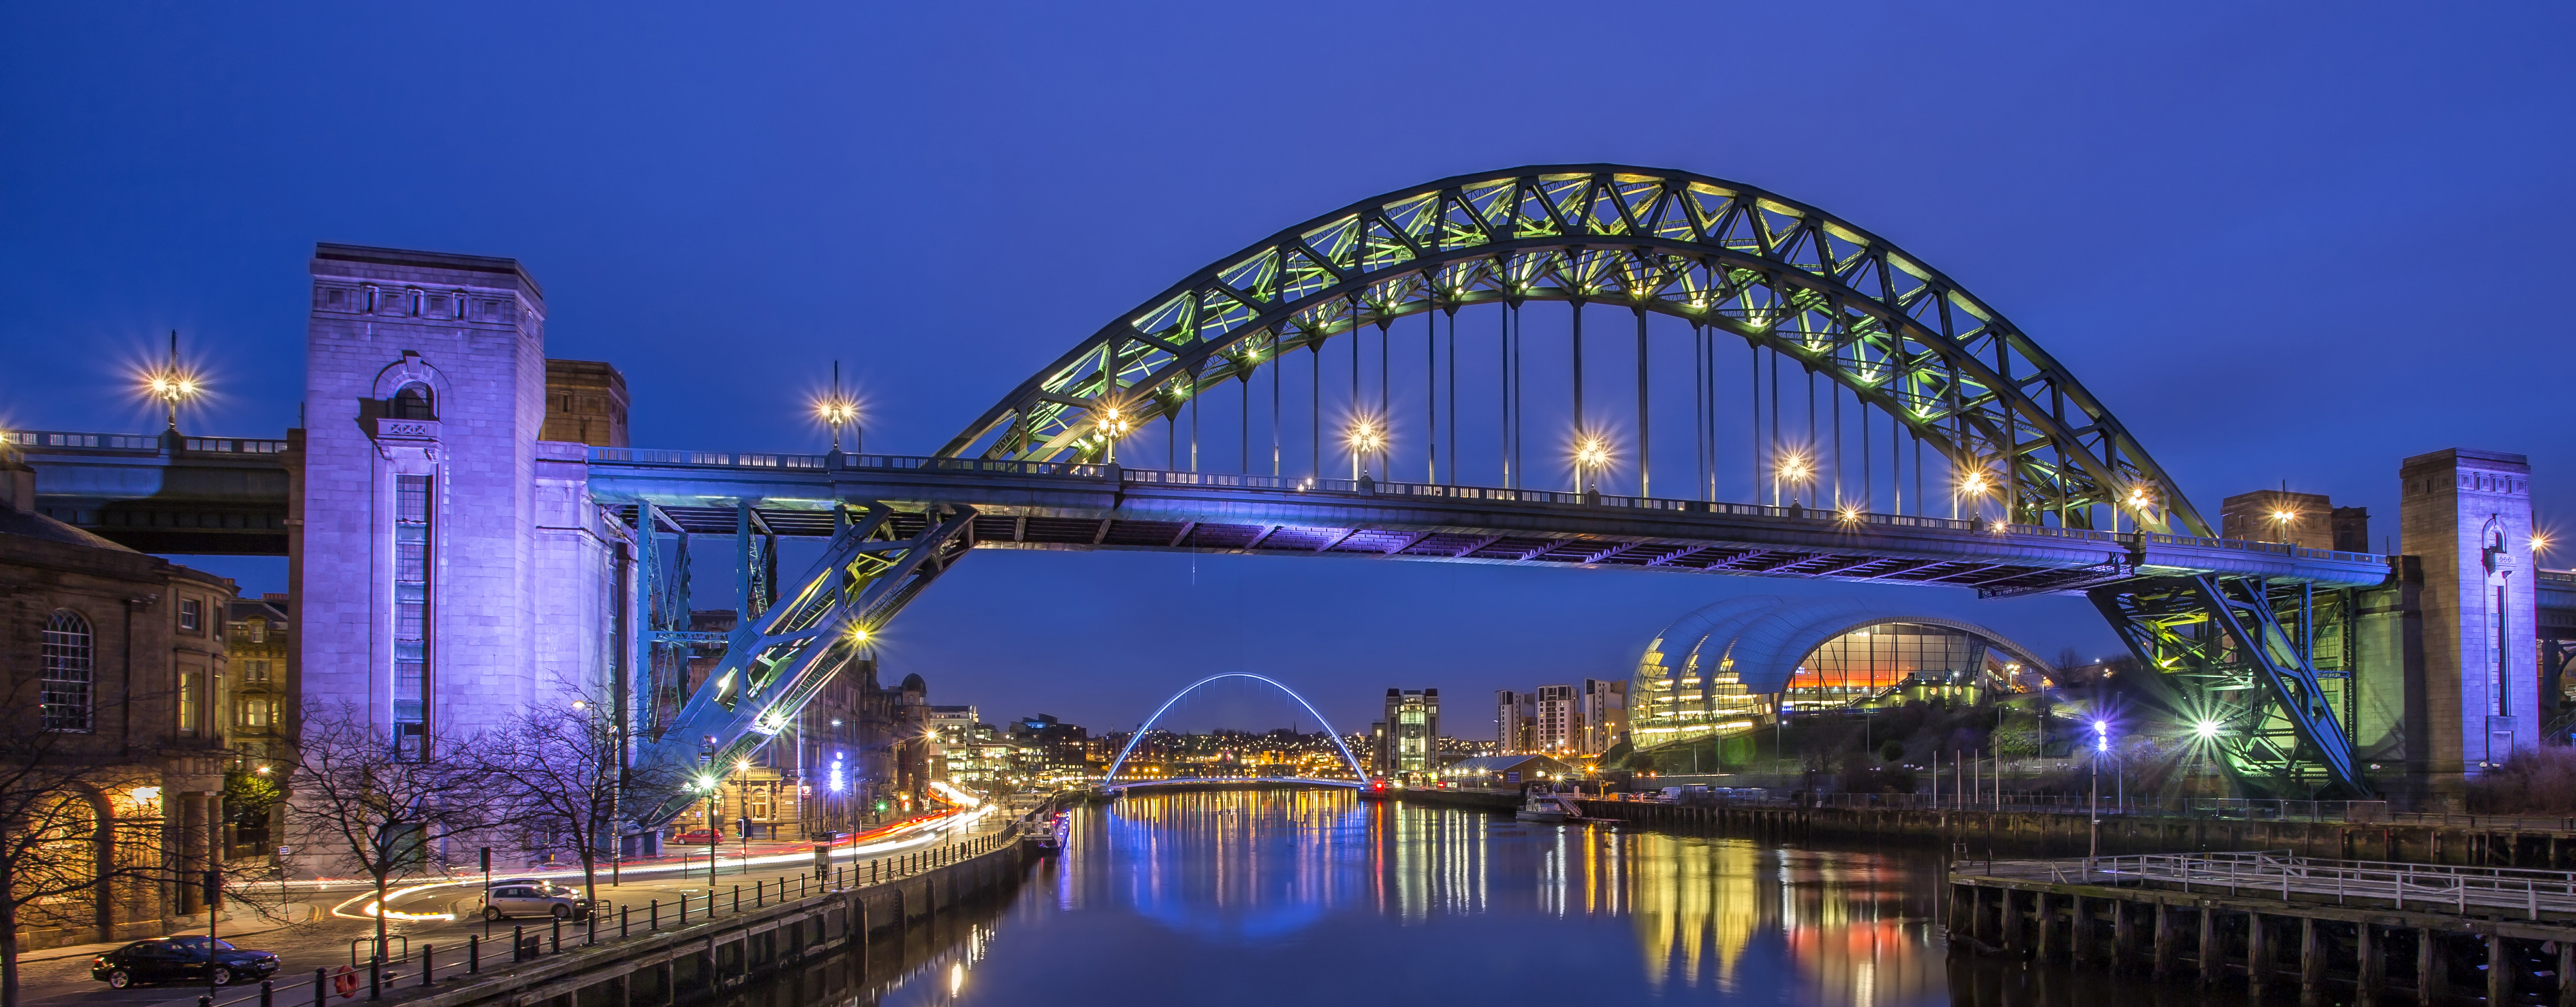 Study Abroad Global Opportunities Newcastle University